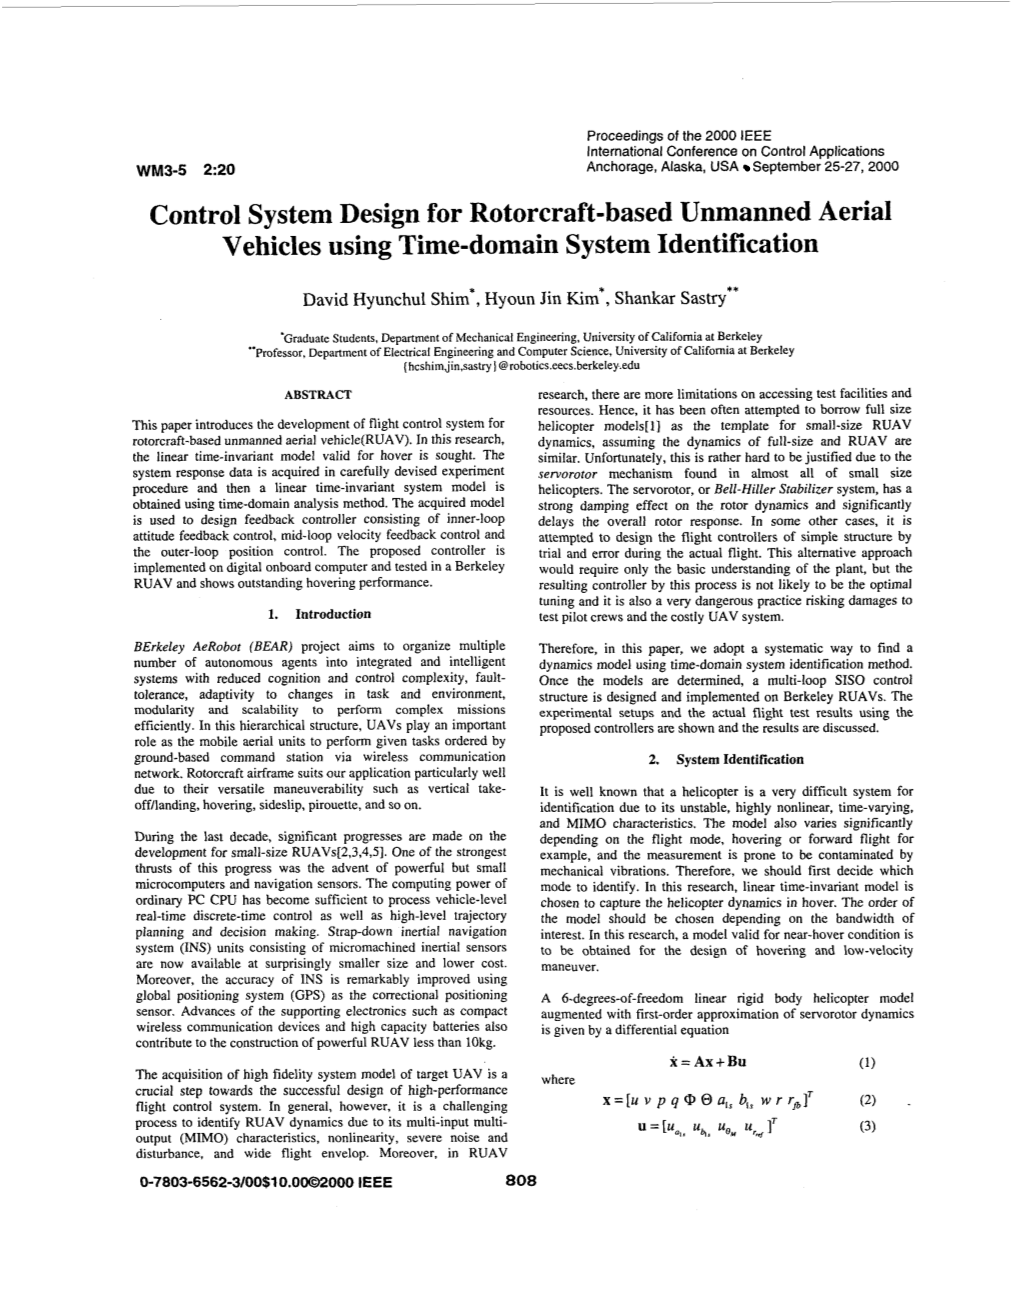 Control System Design for Rotorcraft-Based Unmanned Aerial Vehicles Using Time-Domain System Identification